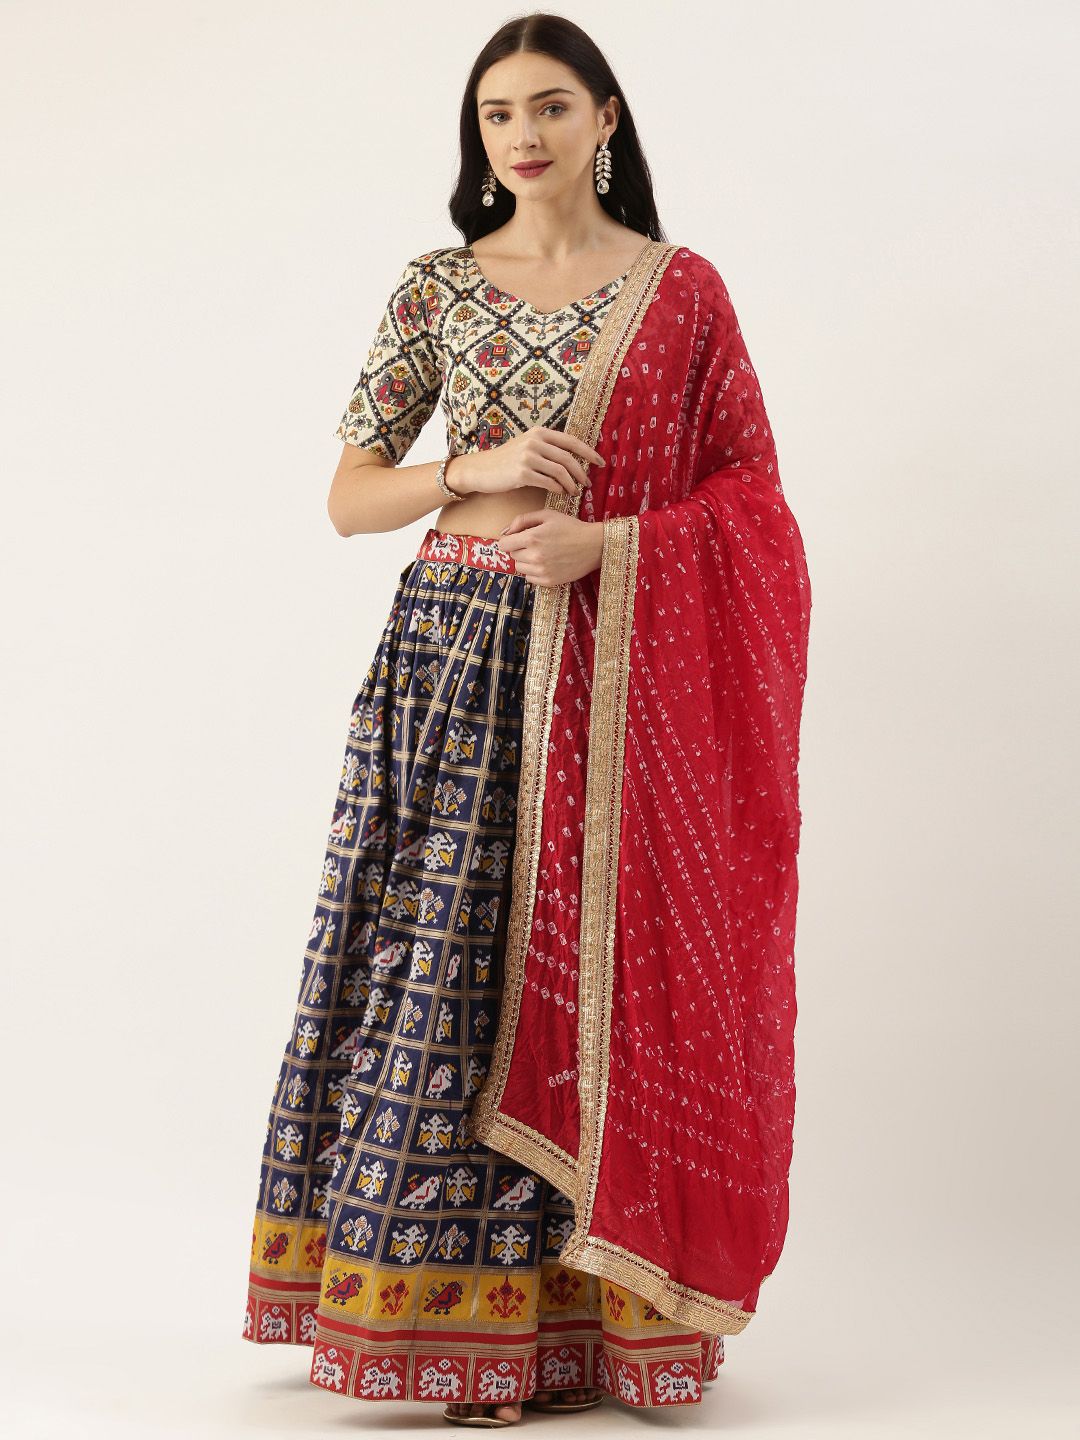 LOOKNBOOK ART Navy Blue & White Printed Semi-Stitched Lehenga & Unstitched Blouse with Dupatta Price in India